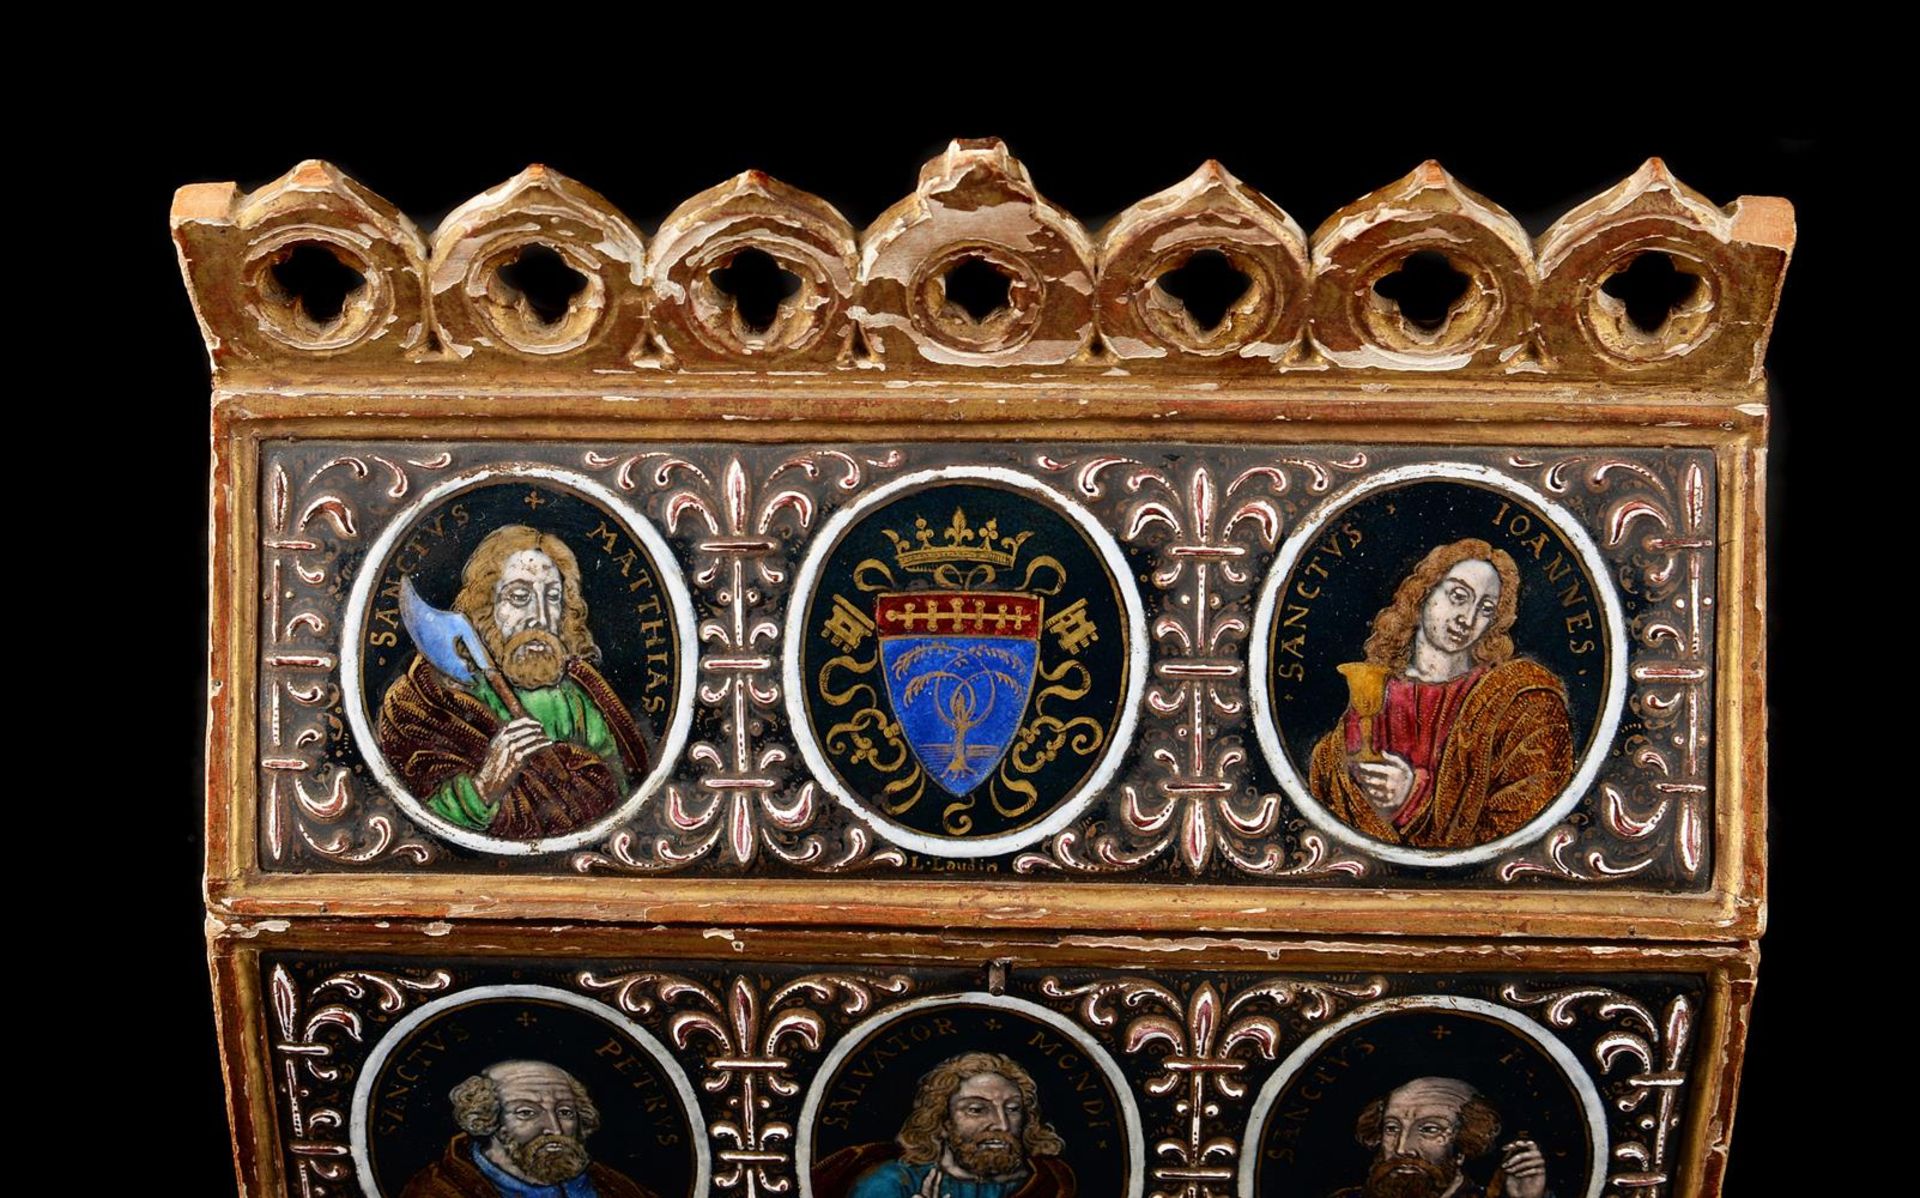 A GILTWOOD AND ENAMEL SET CHASSE OR CASKET, IN THE 16TH CENTURY LIMOGES MANNER - Image 6 of 8